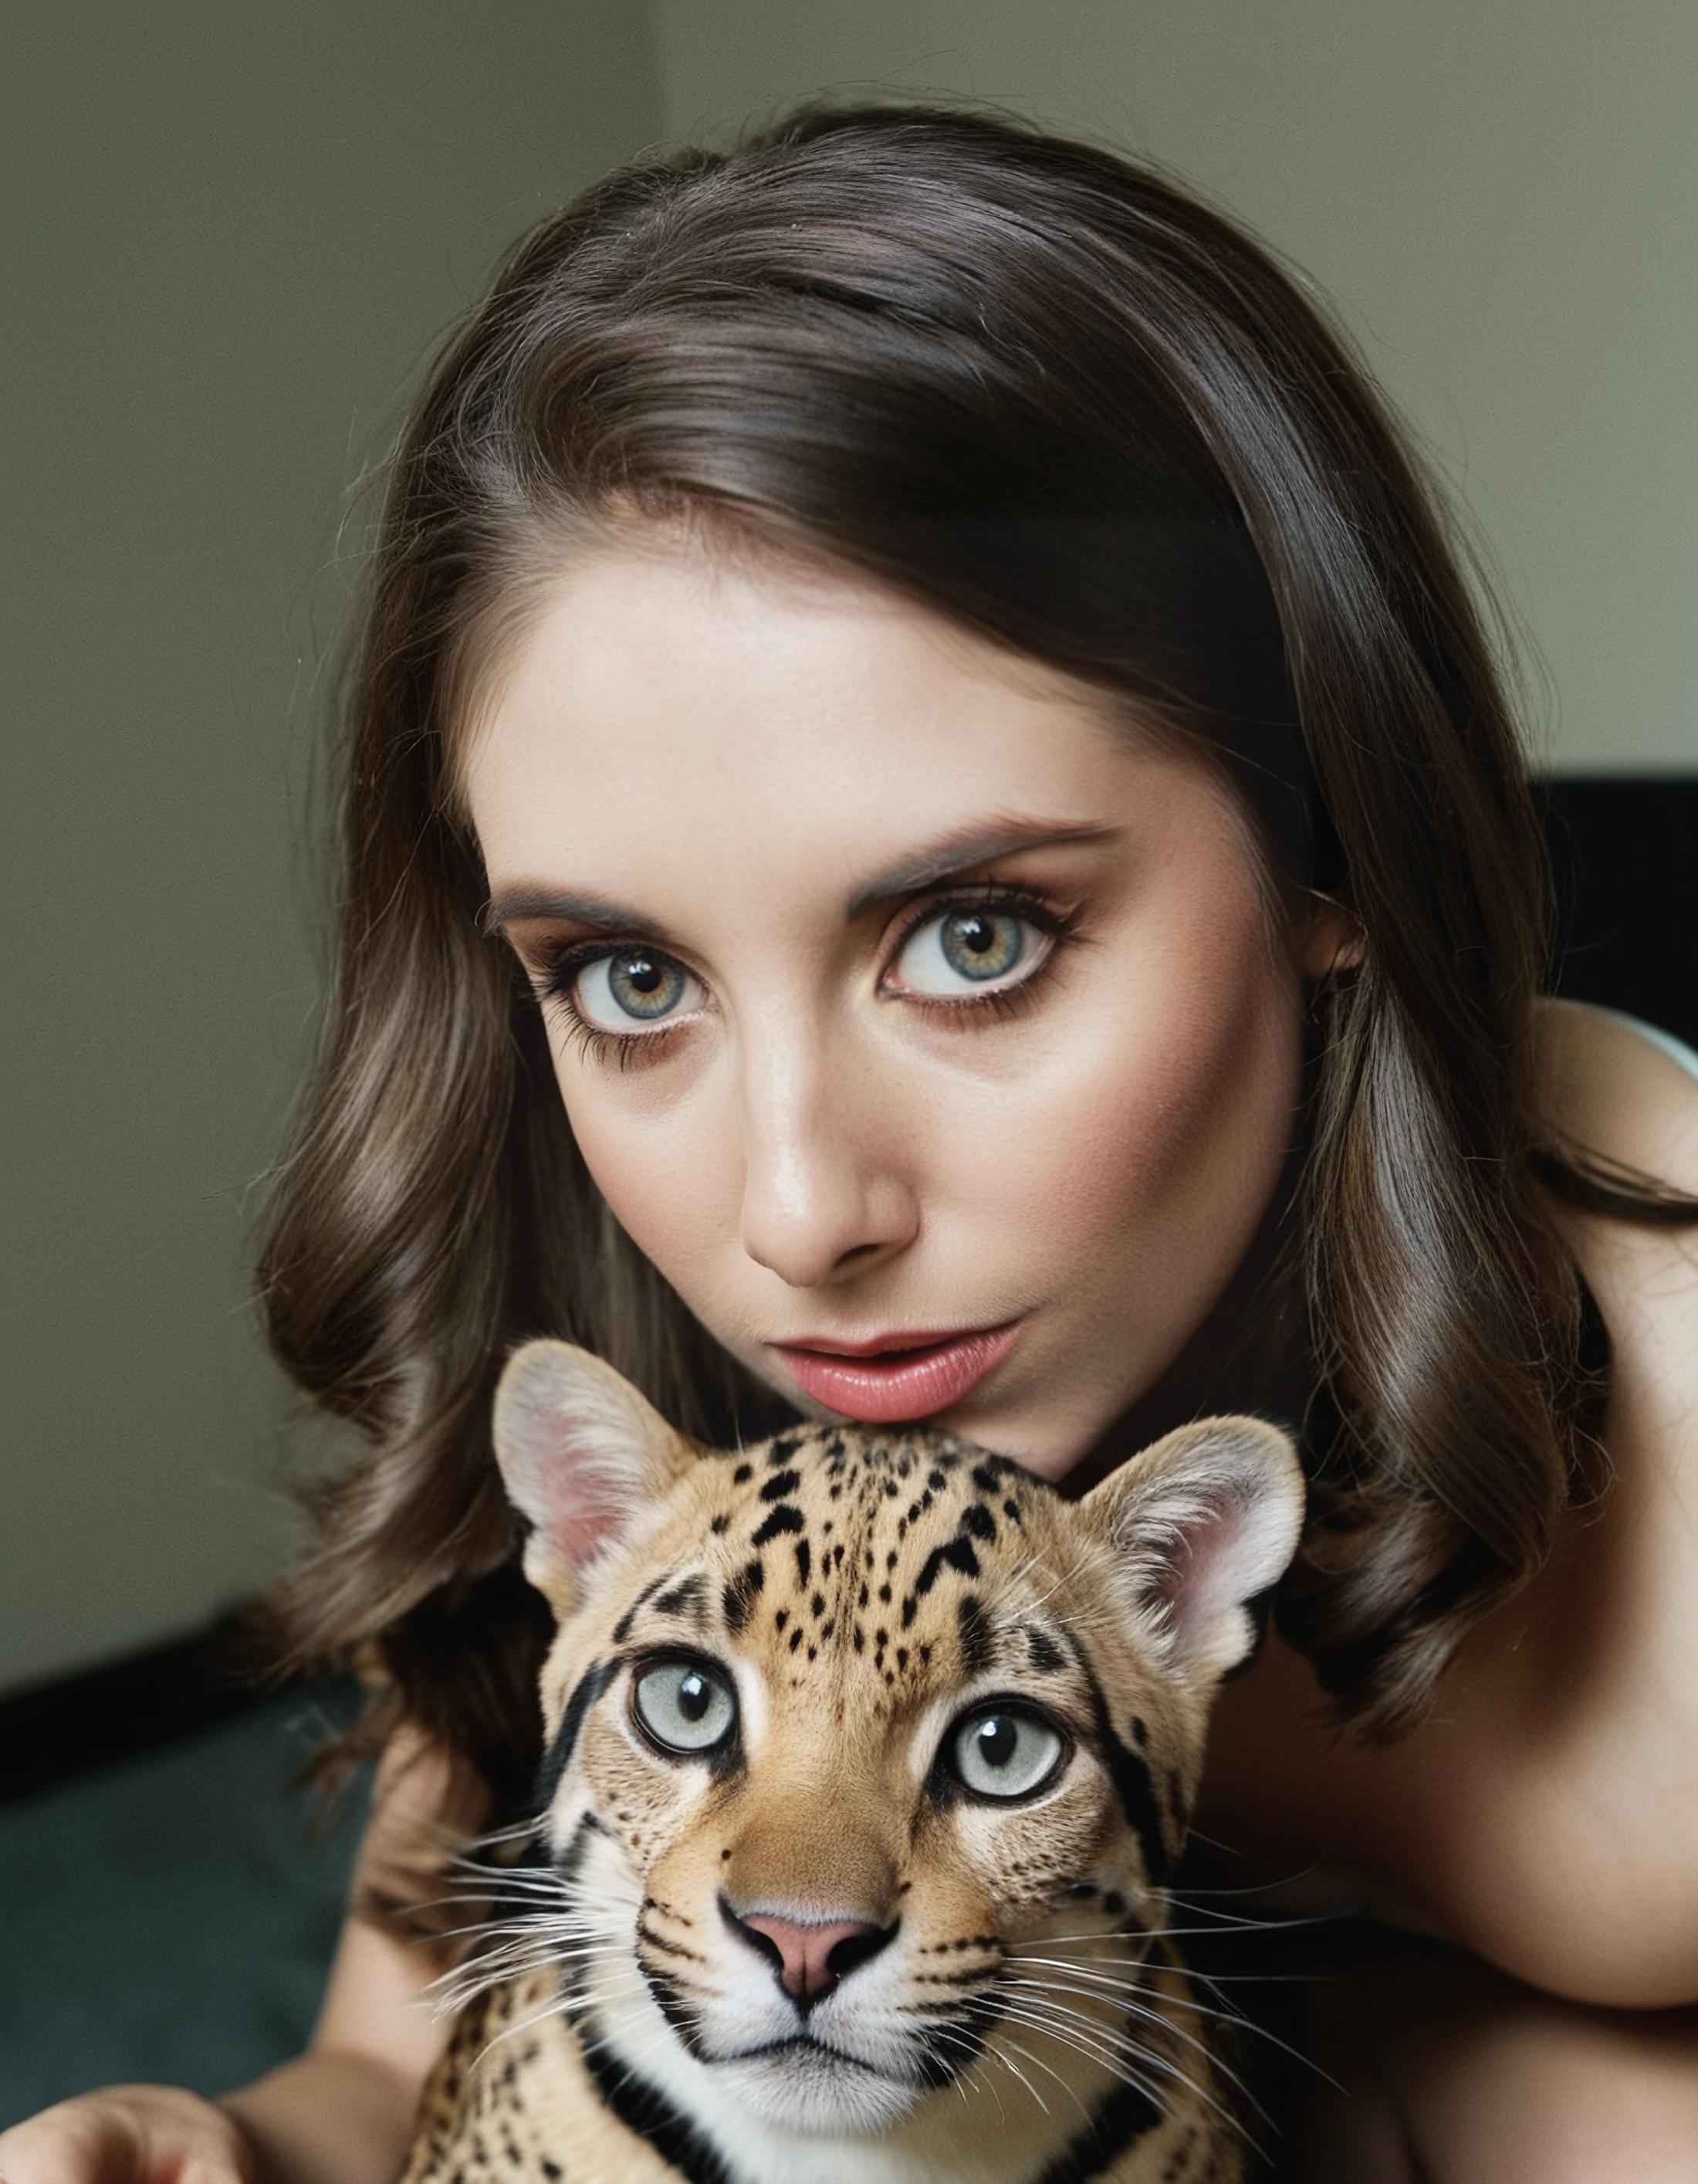 Alison Brie image by NepoBaby